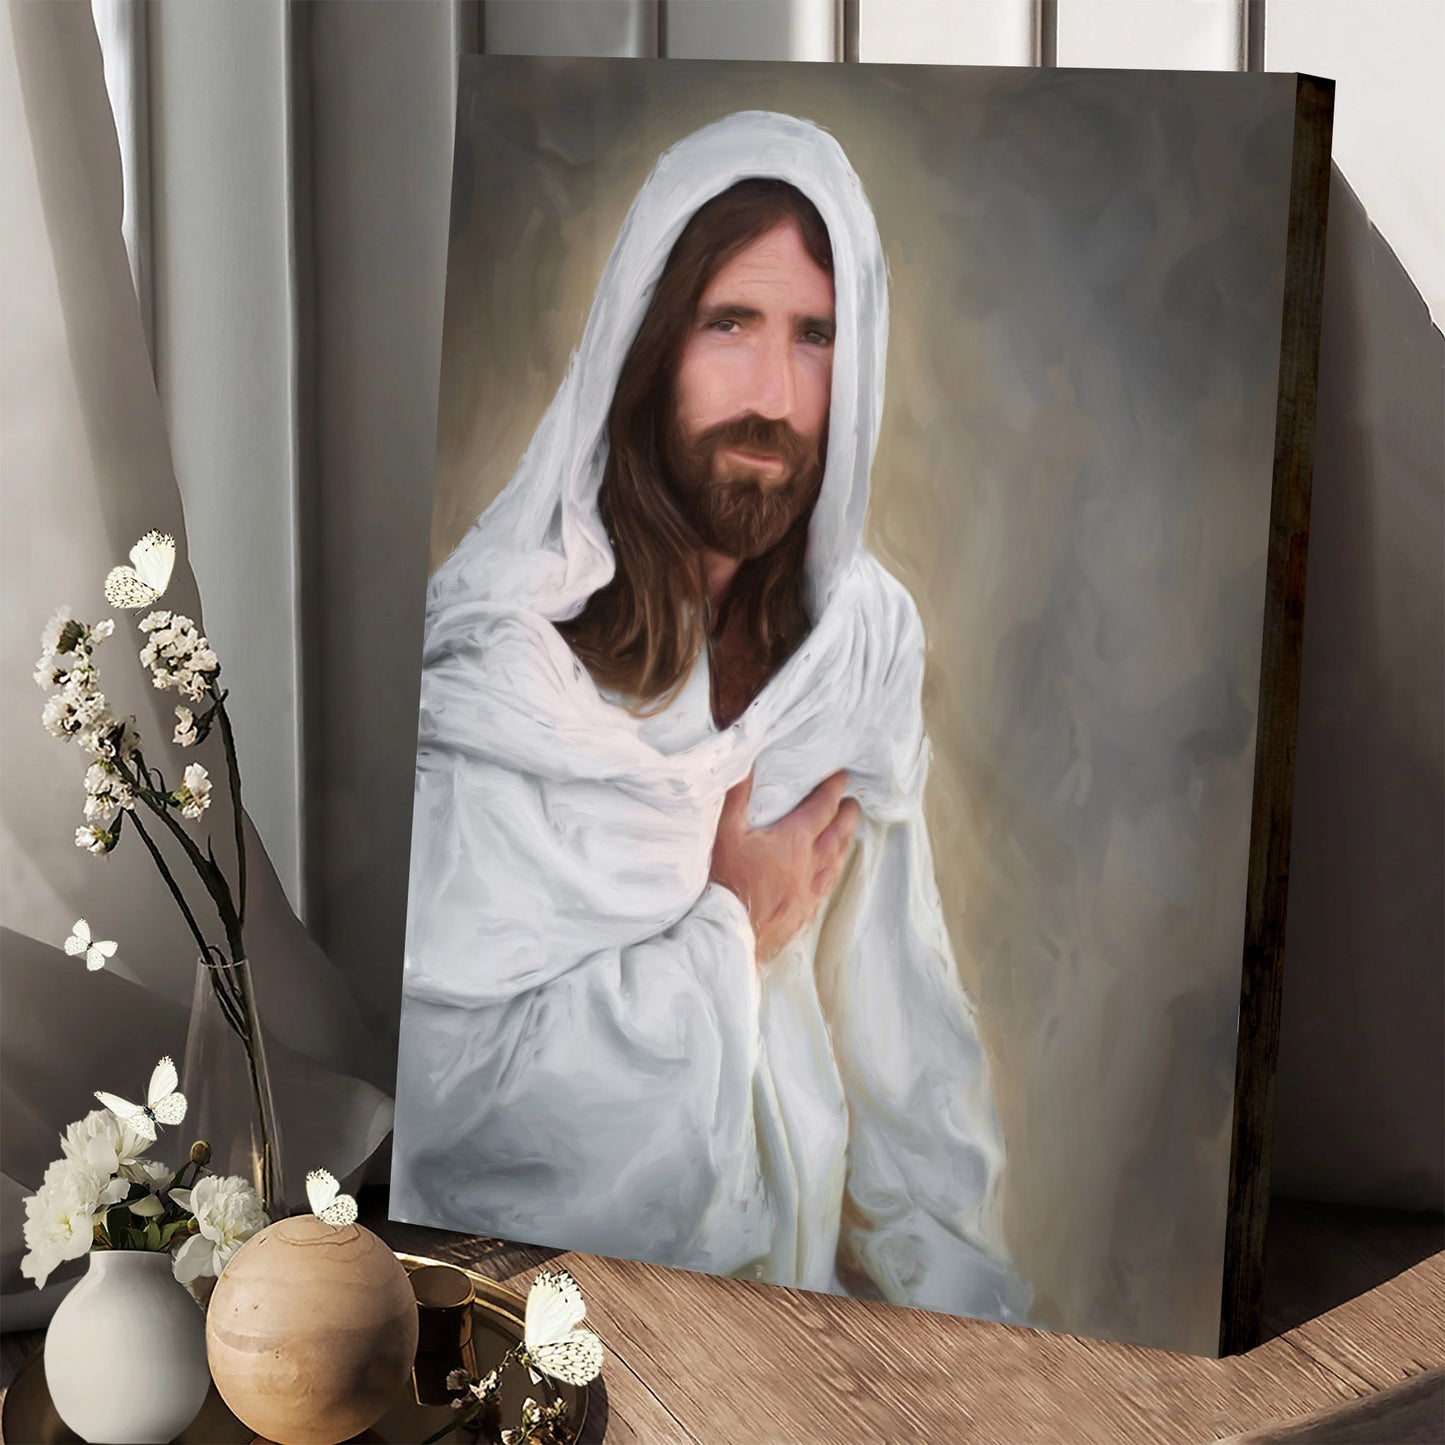 Promise Keeper Canvas Picture - Jesus Christ Canvas Art - Christian Wall Canvas